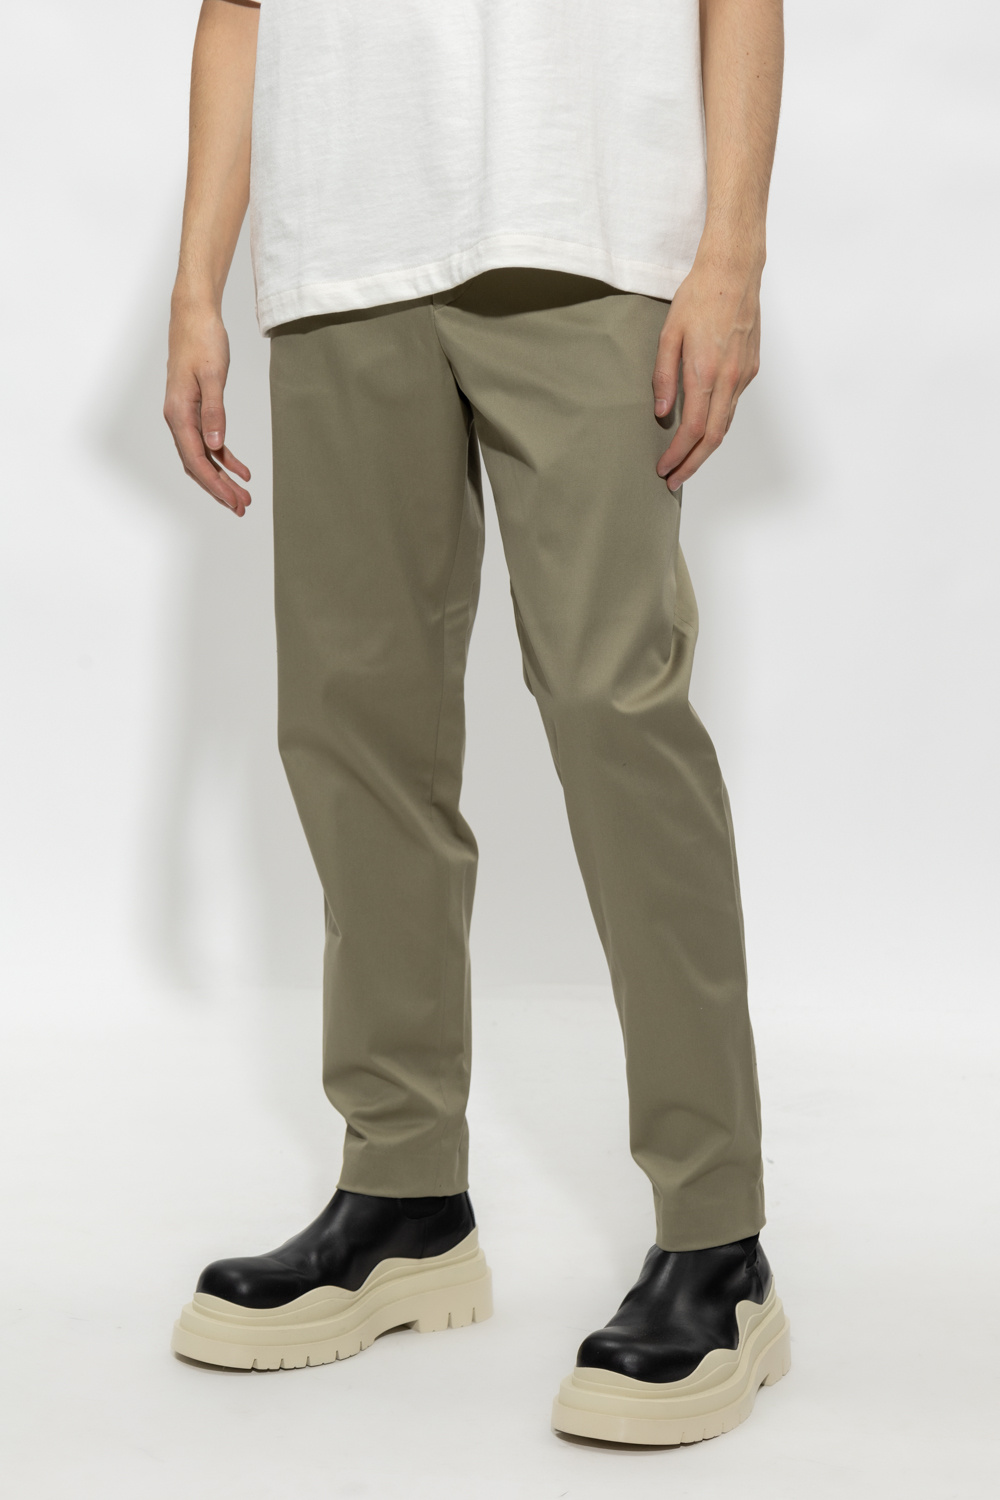 Paul Smith Pleat-front com trousers